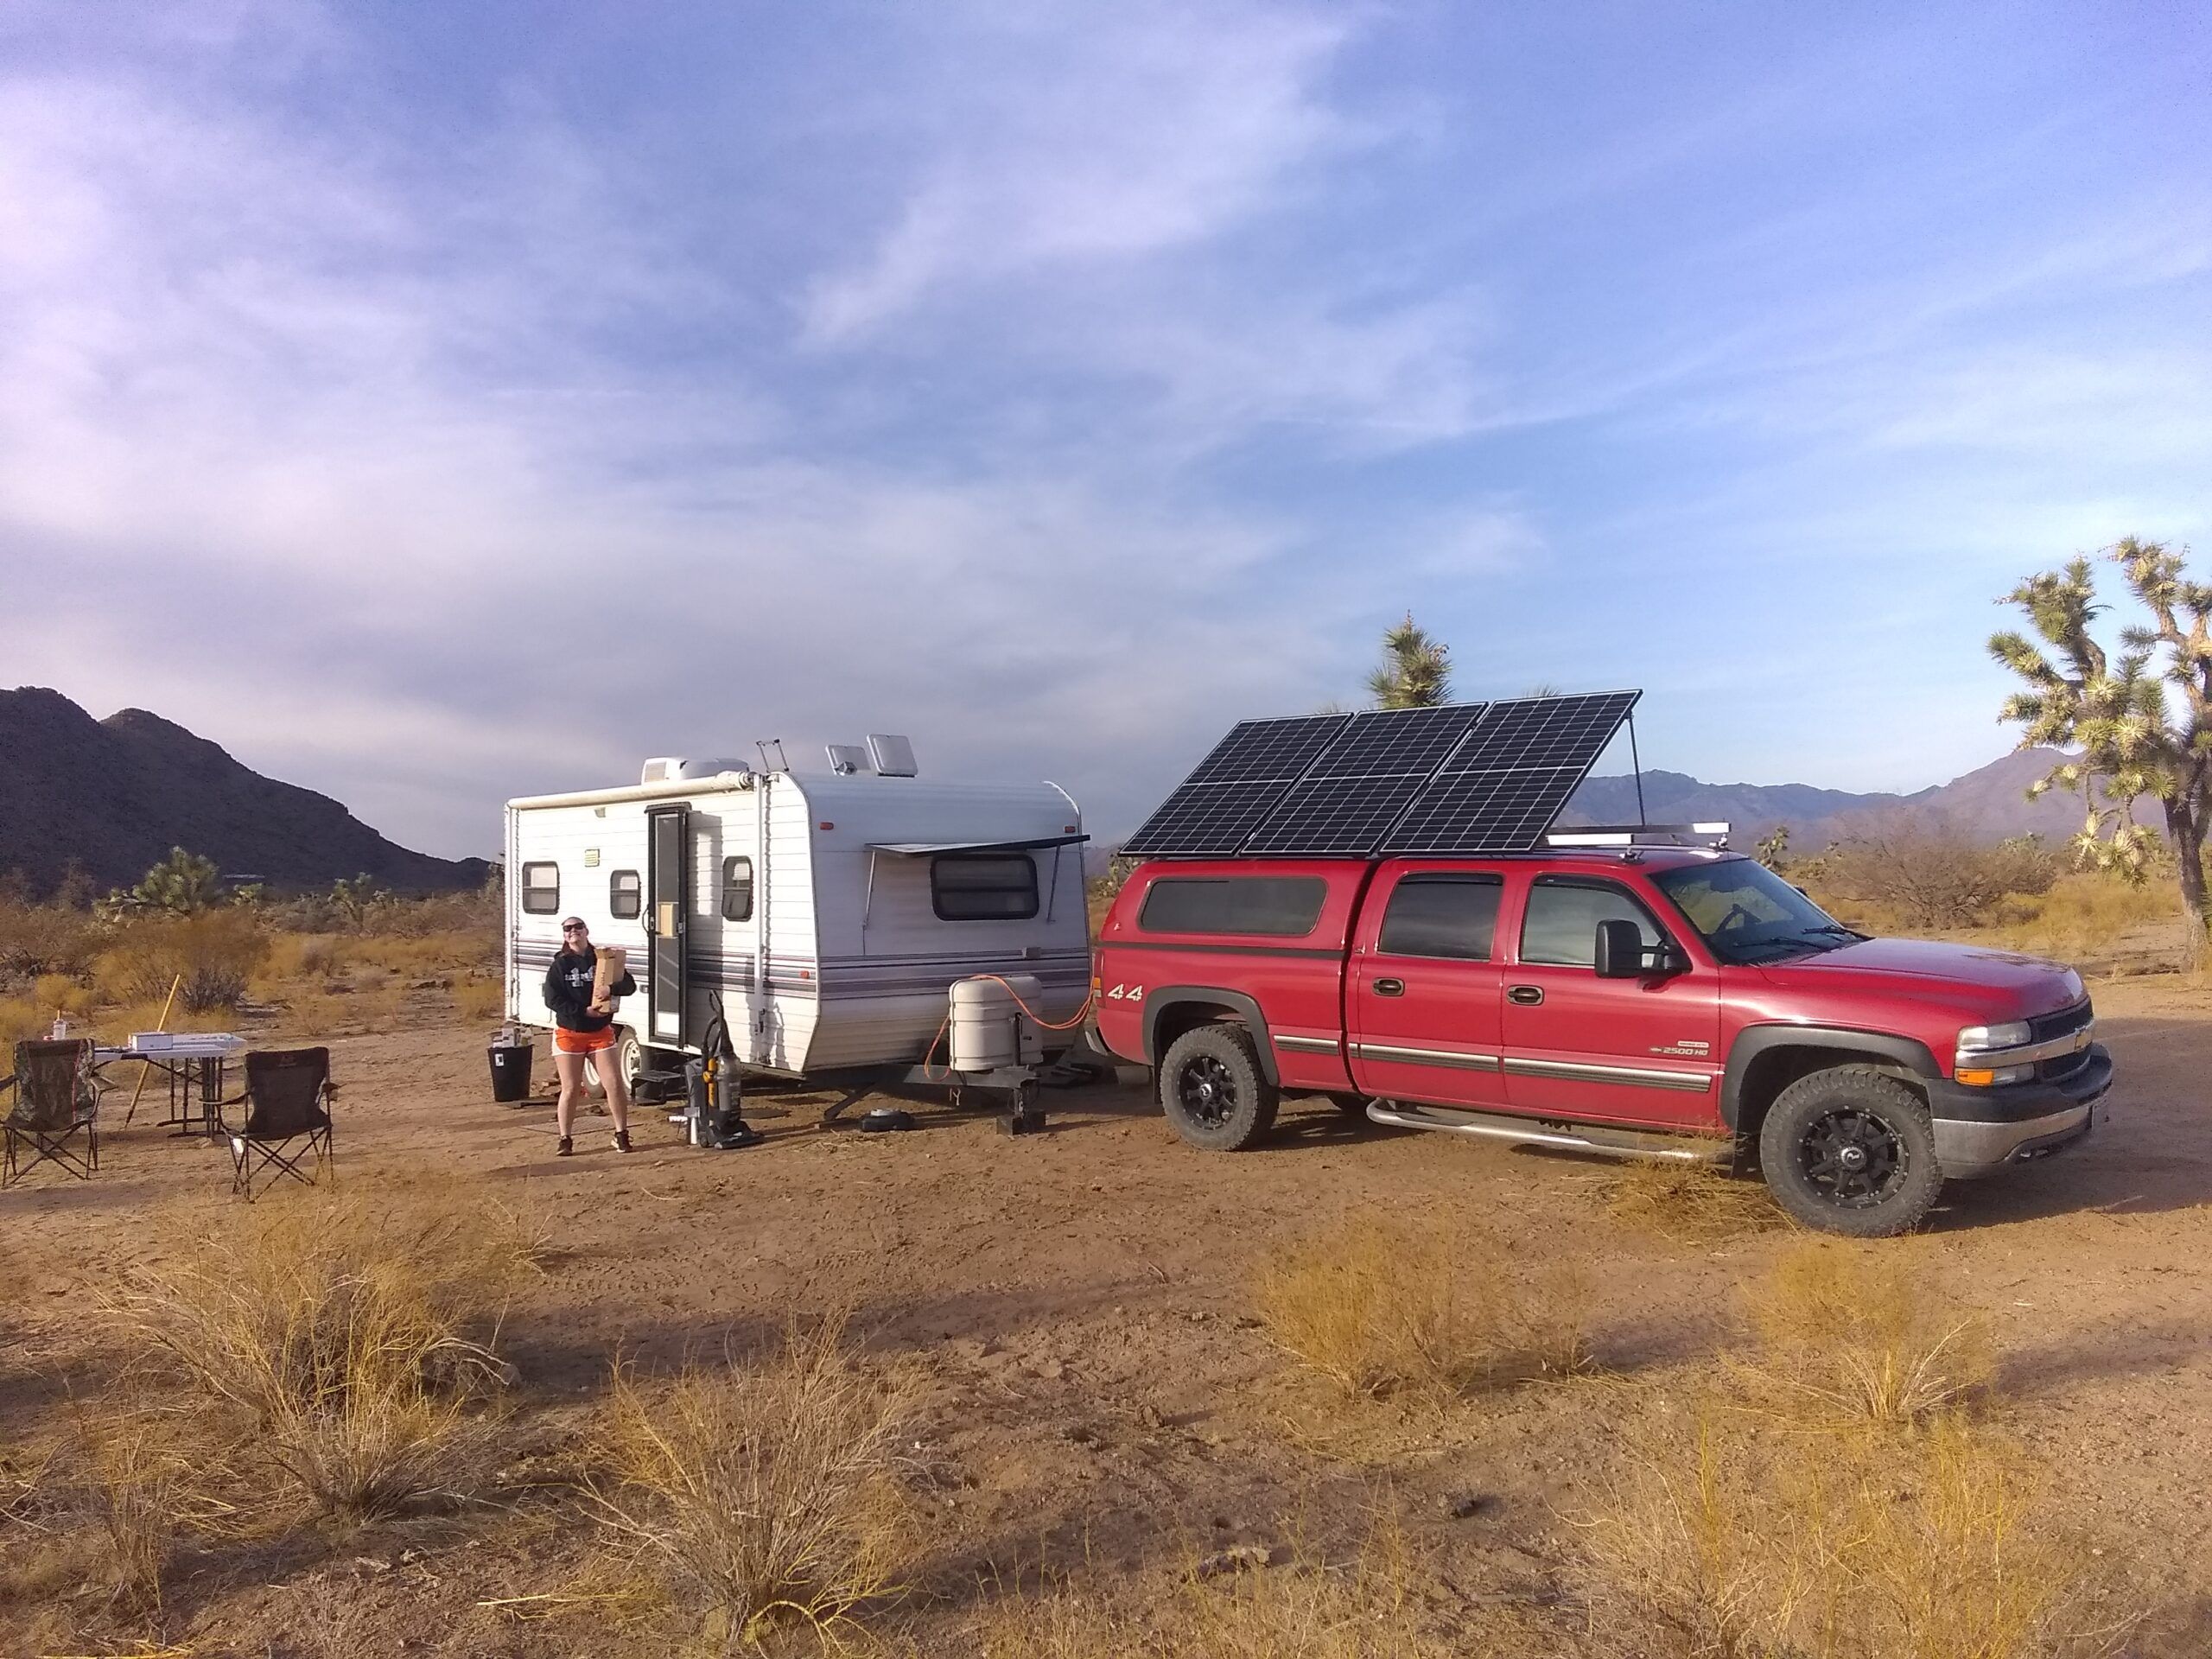 Picture of Boondocking setup including truck with solar panels on roof, and tow behind RV in Arizona.